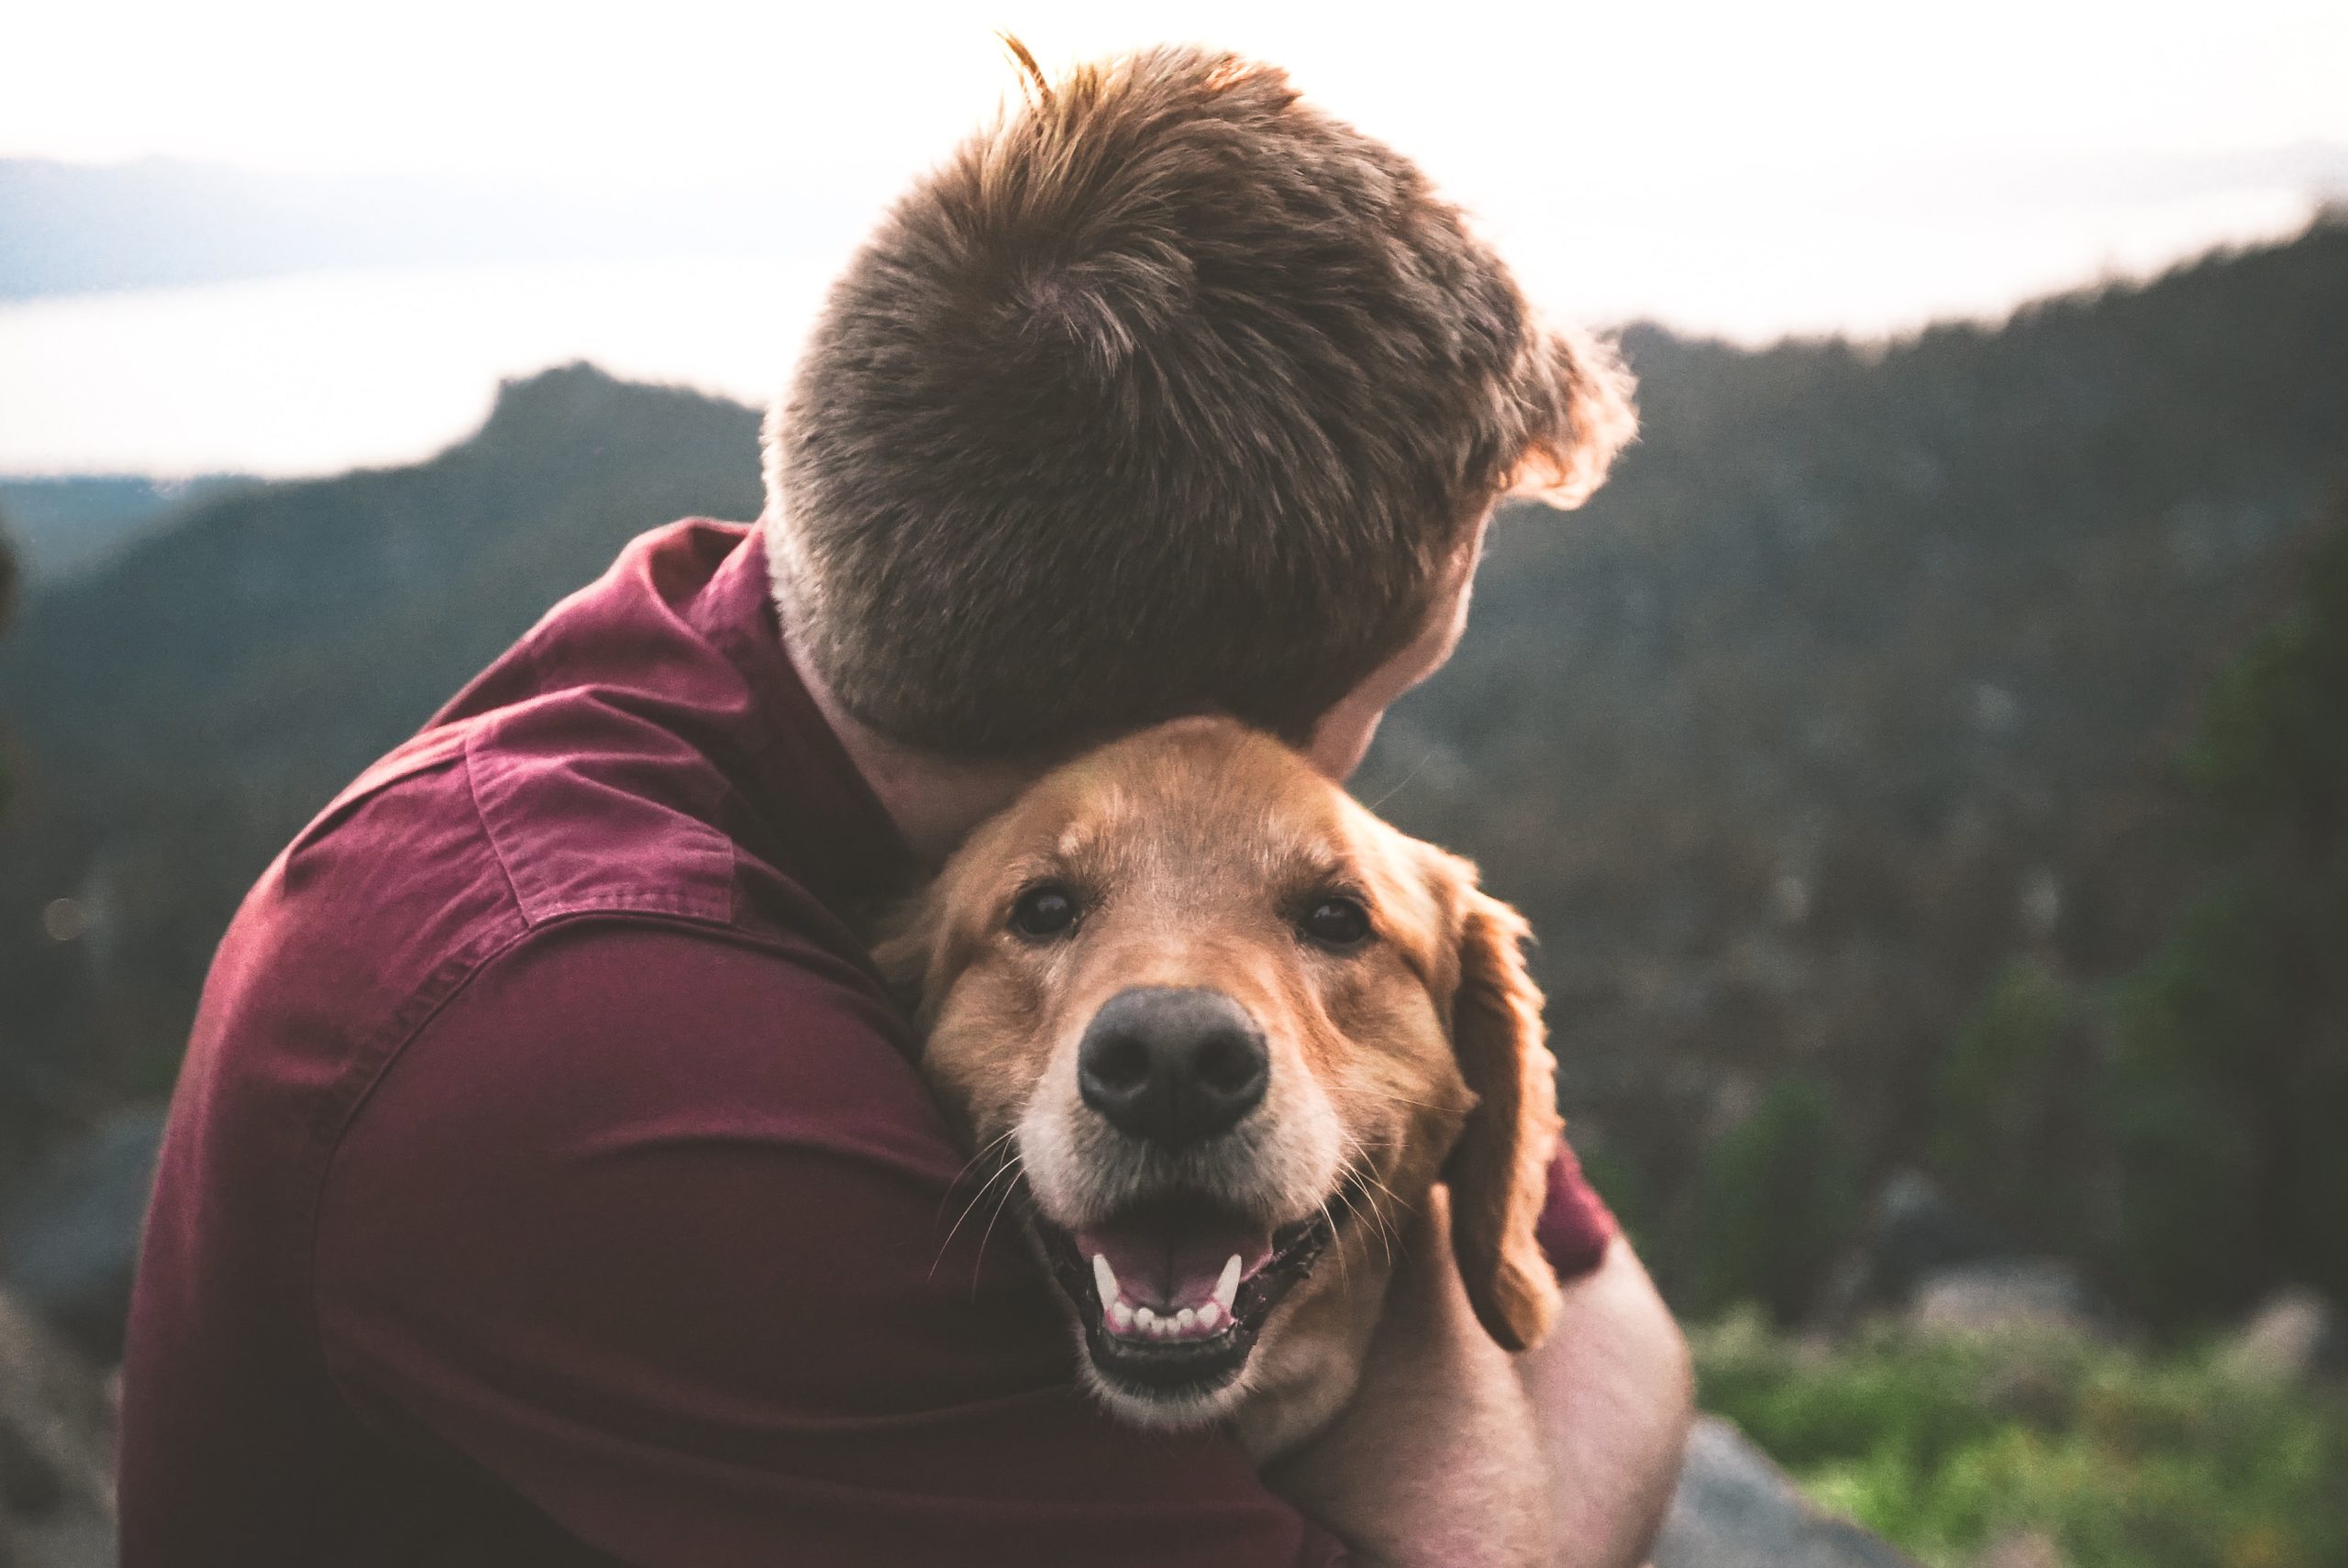 man hugging dog outdoors overlooking mountain dog looking into camera